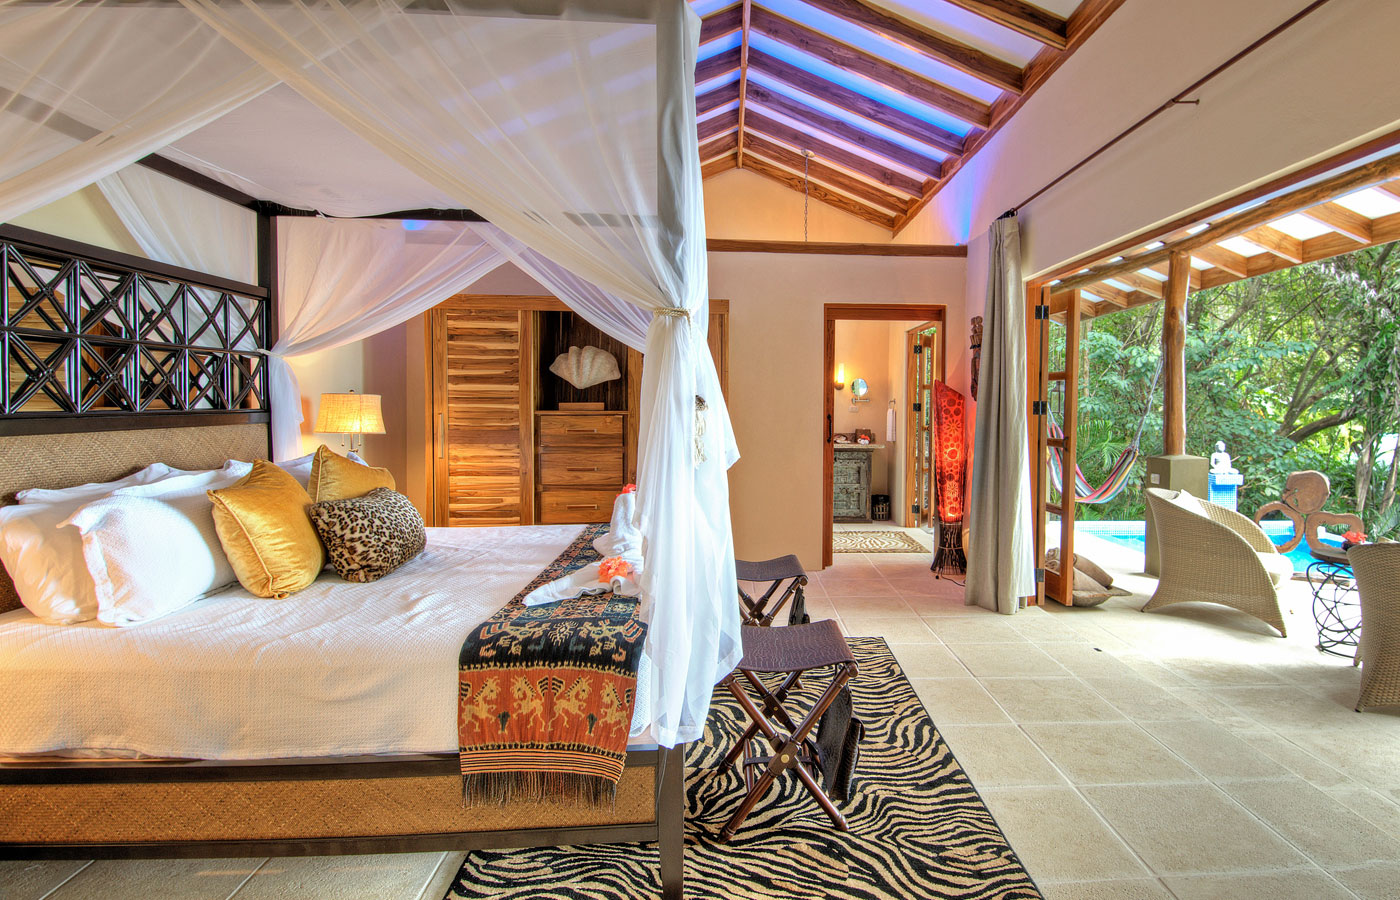 A stylish and secluded room at Casa Chameleon, Nicoya Peninsula, Costa Rica